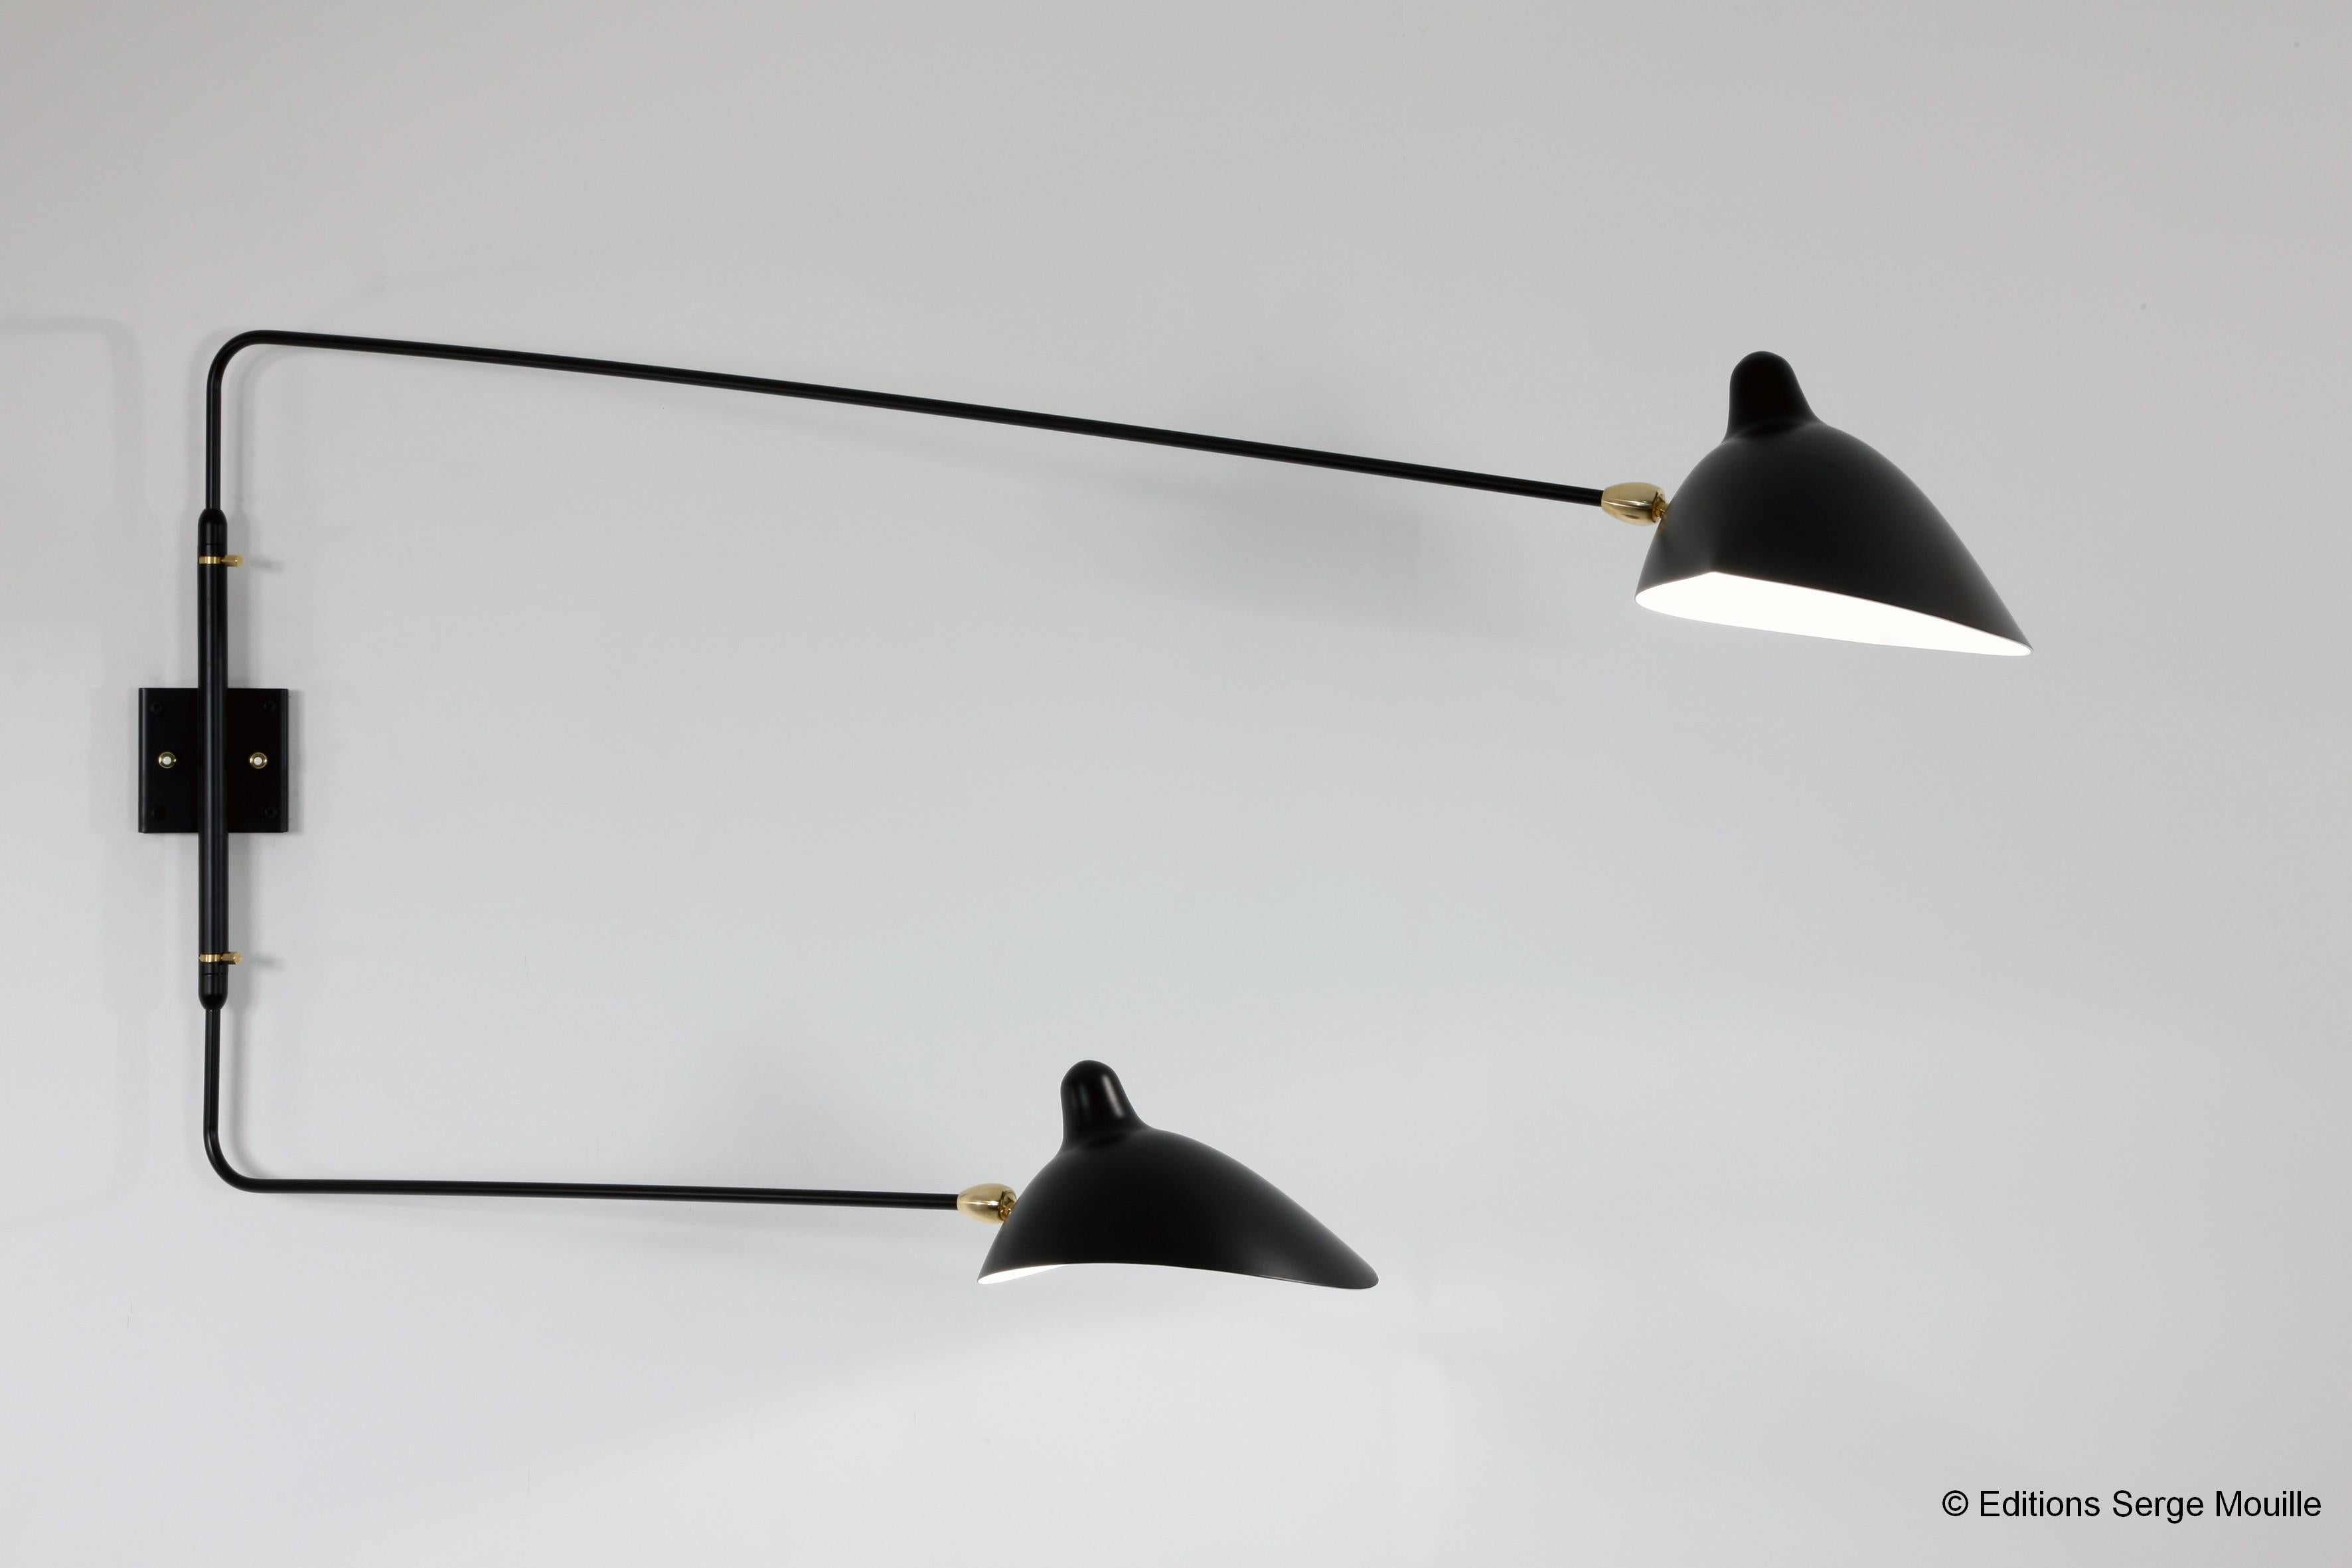 Sconce 2 rotating straight arms by Serge Mouille
Dimensions: D134 x H75 cm
Materials: Brass, steel, aluminium
One of a King. Numbered.
Also available in different colour. 

All our lamps can be wired according to each country. If sold to the